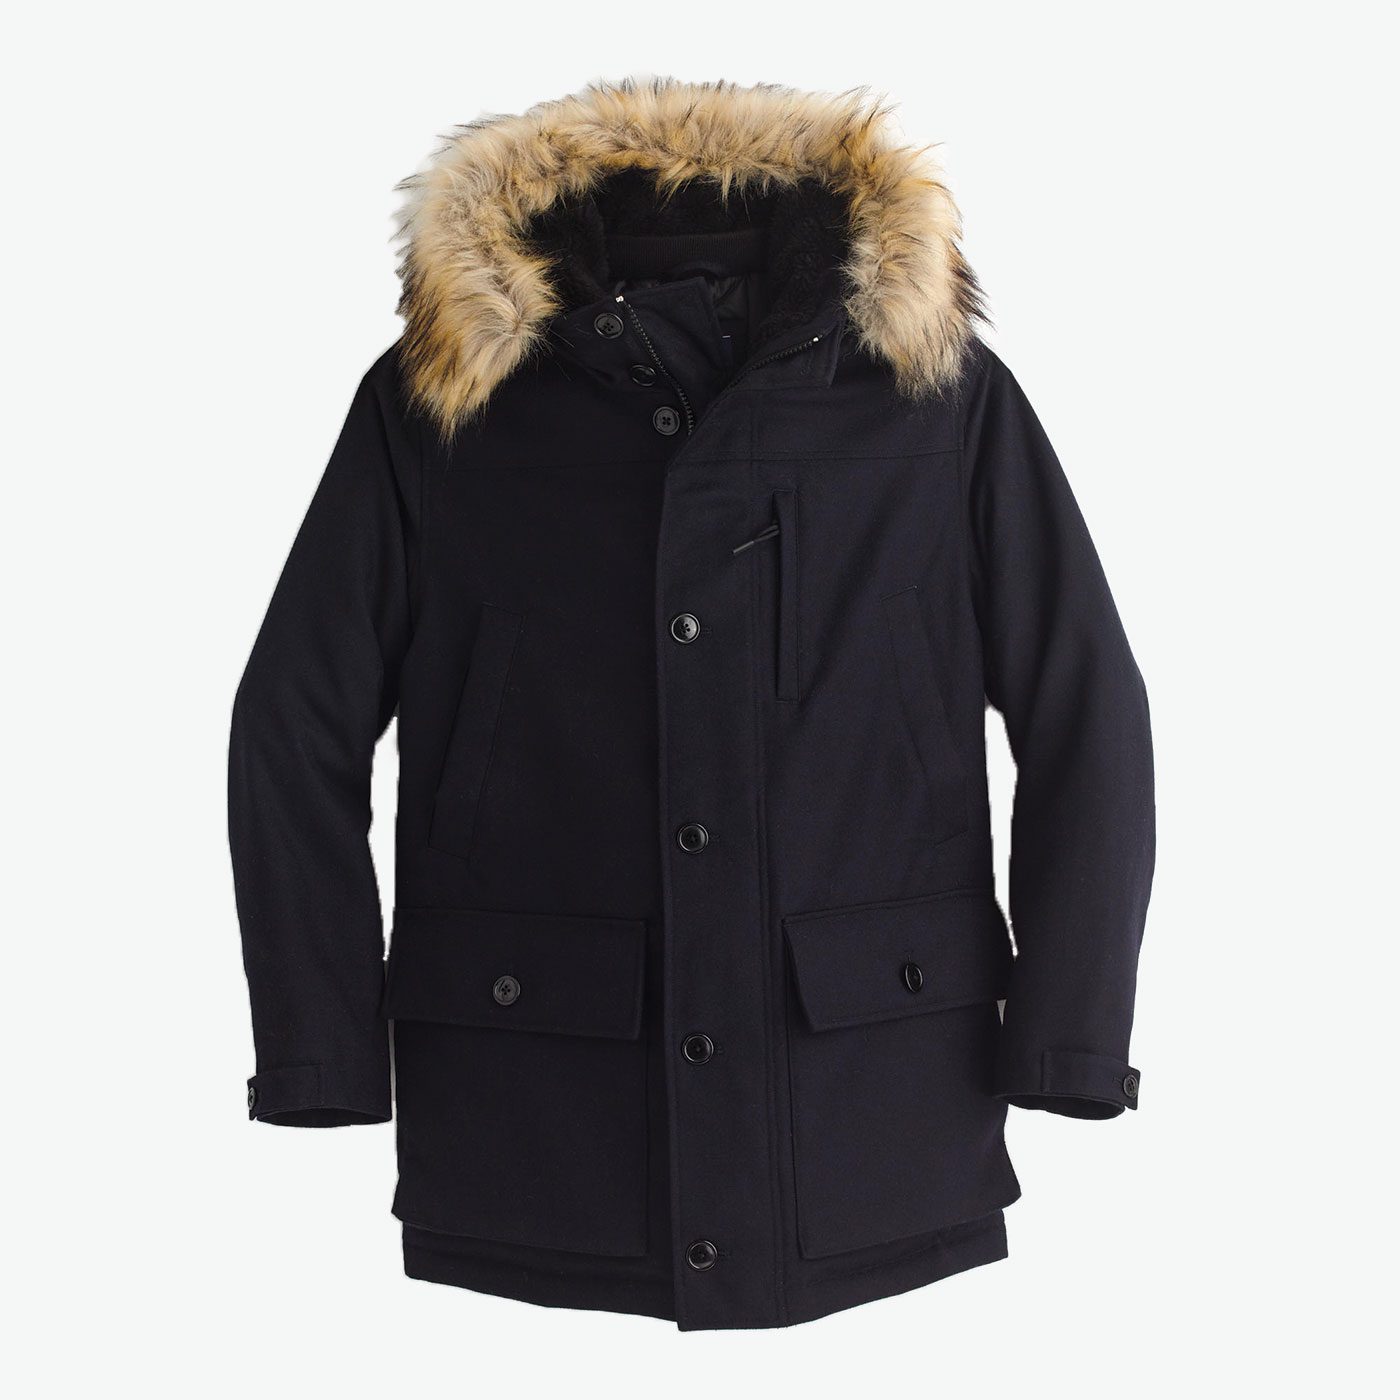 7 Classy Picks for the Coldest Months of the Year - The GentleManual